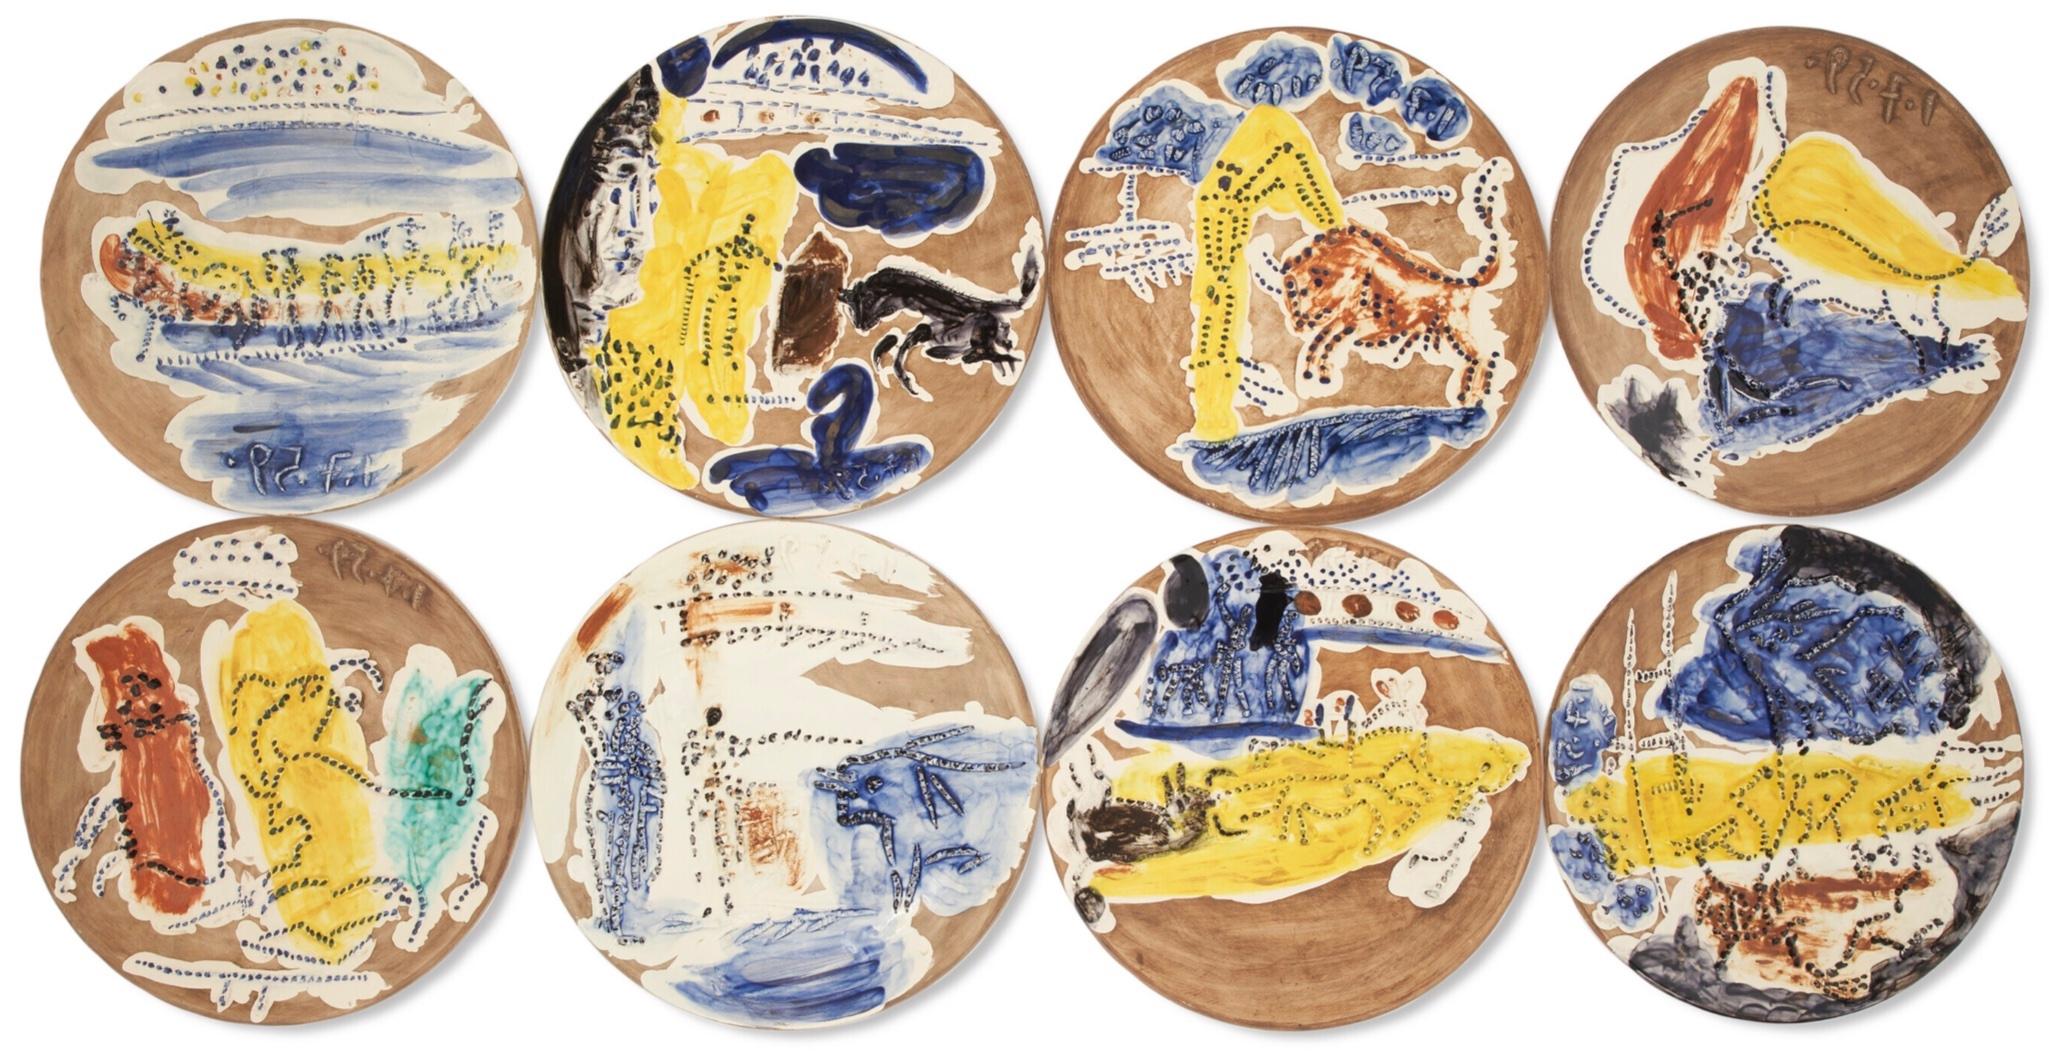 PABLO PICASSO (1881-1973) 
Service scènes de corrida (A. R. 416 - 423) 

The complete set, comprising eight terre de faïence plates, painted in colors and partially glazed, 1959, each numbered 1/50, with the Empreinte Originale de Picasso and